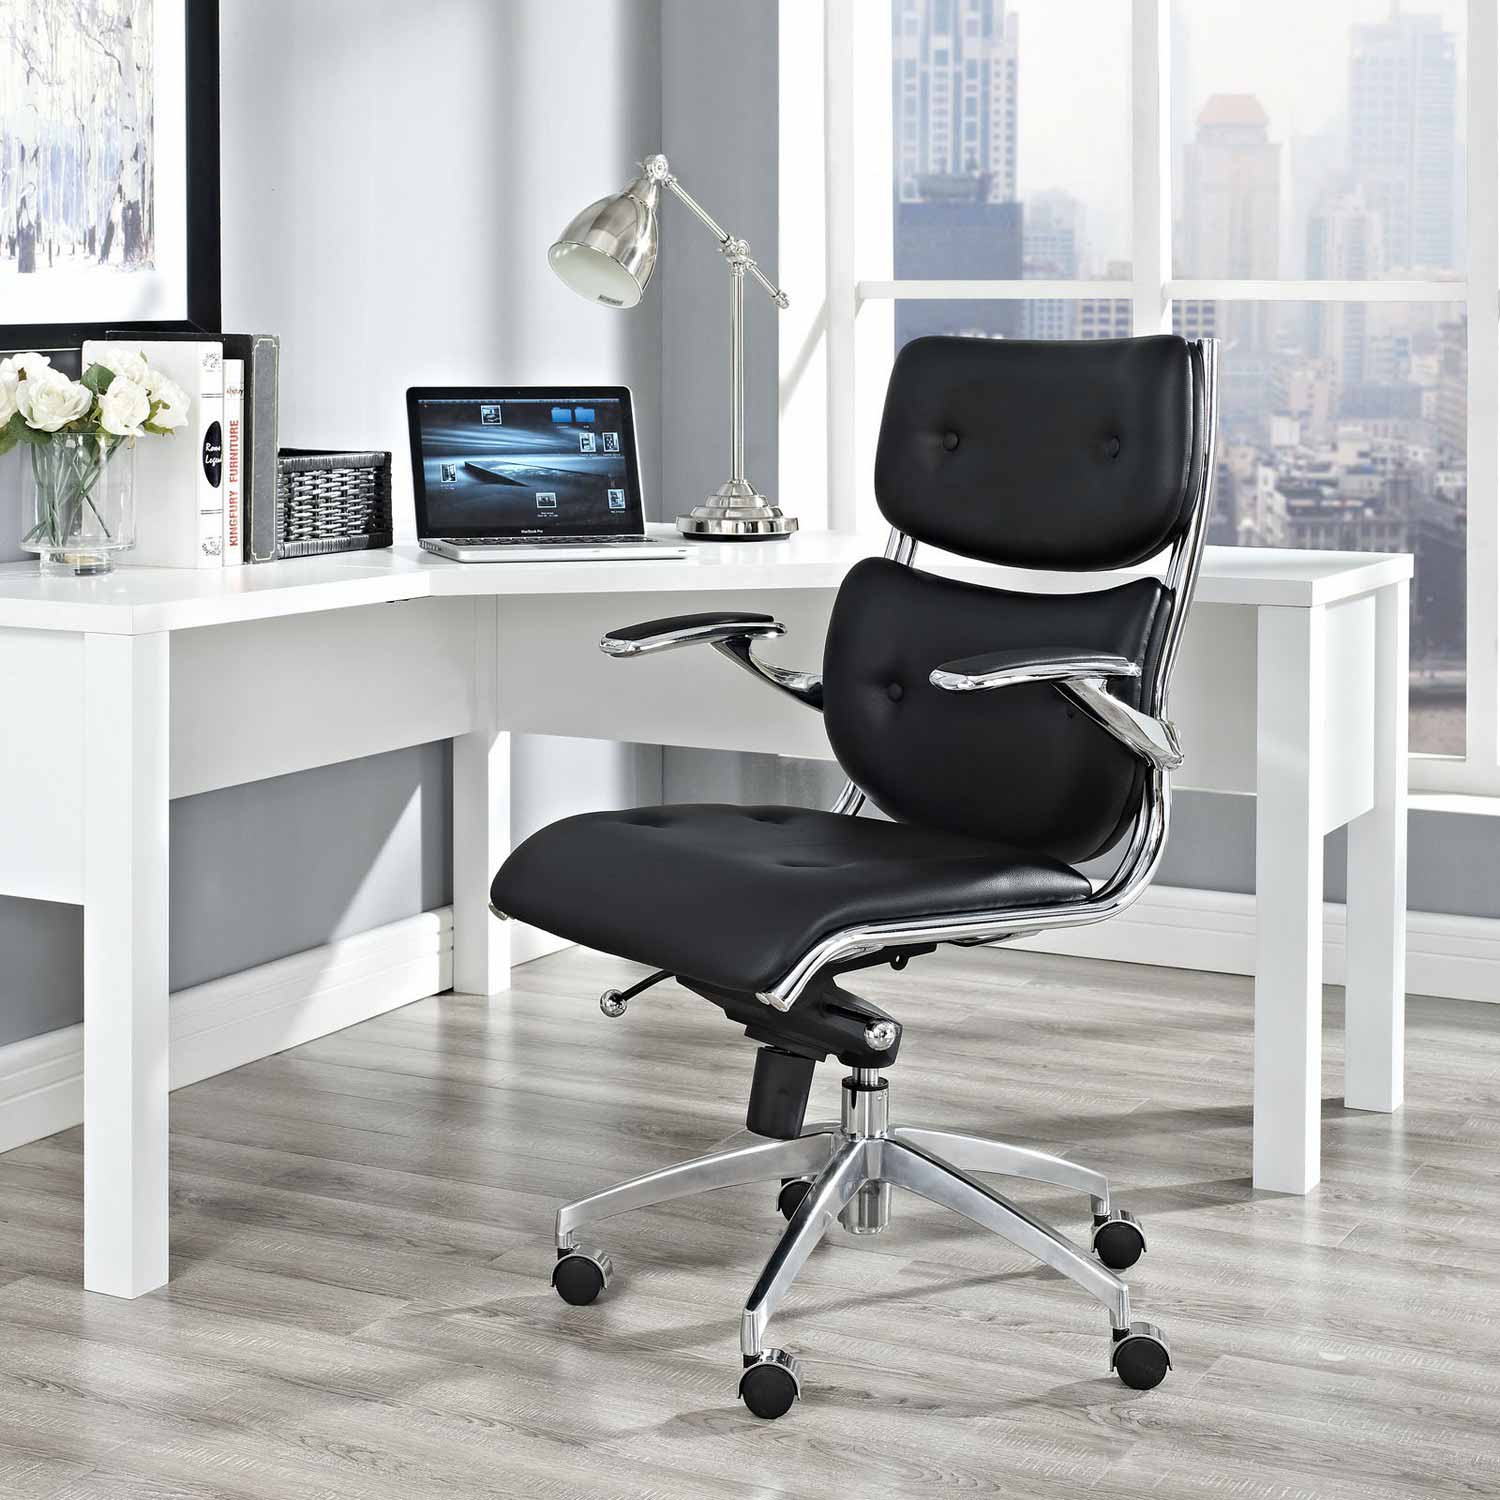 Modway Push Mid Back Office Chair - Black